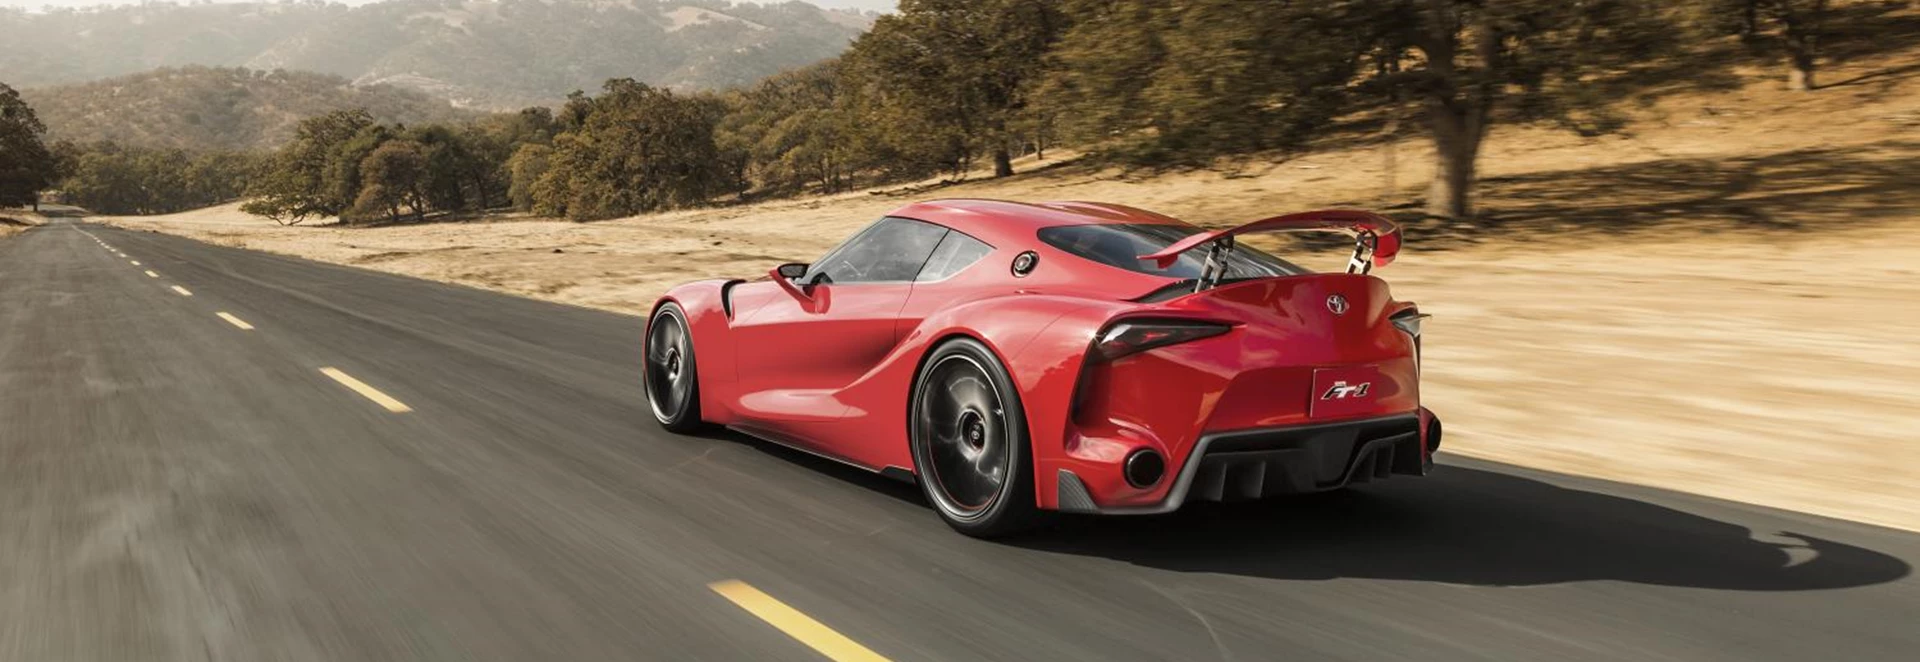 New Toyota Supra engine and transmission details leaked online 